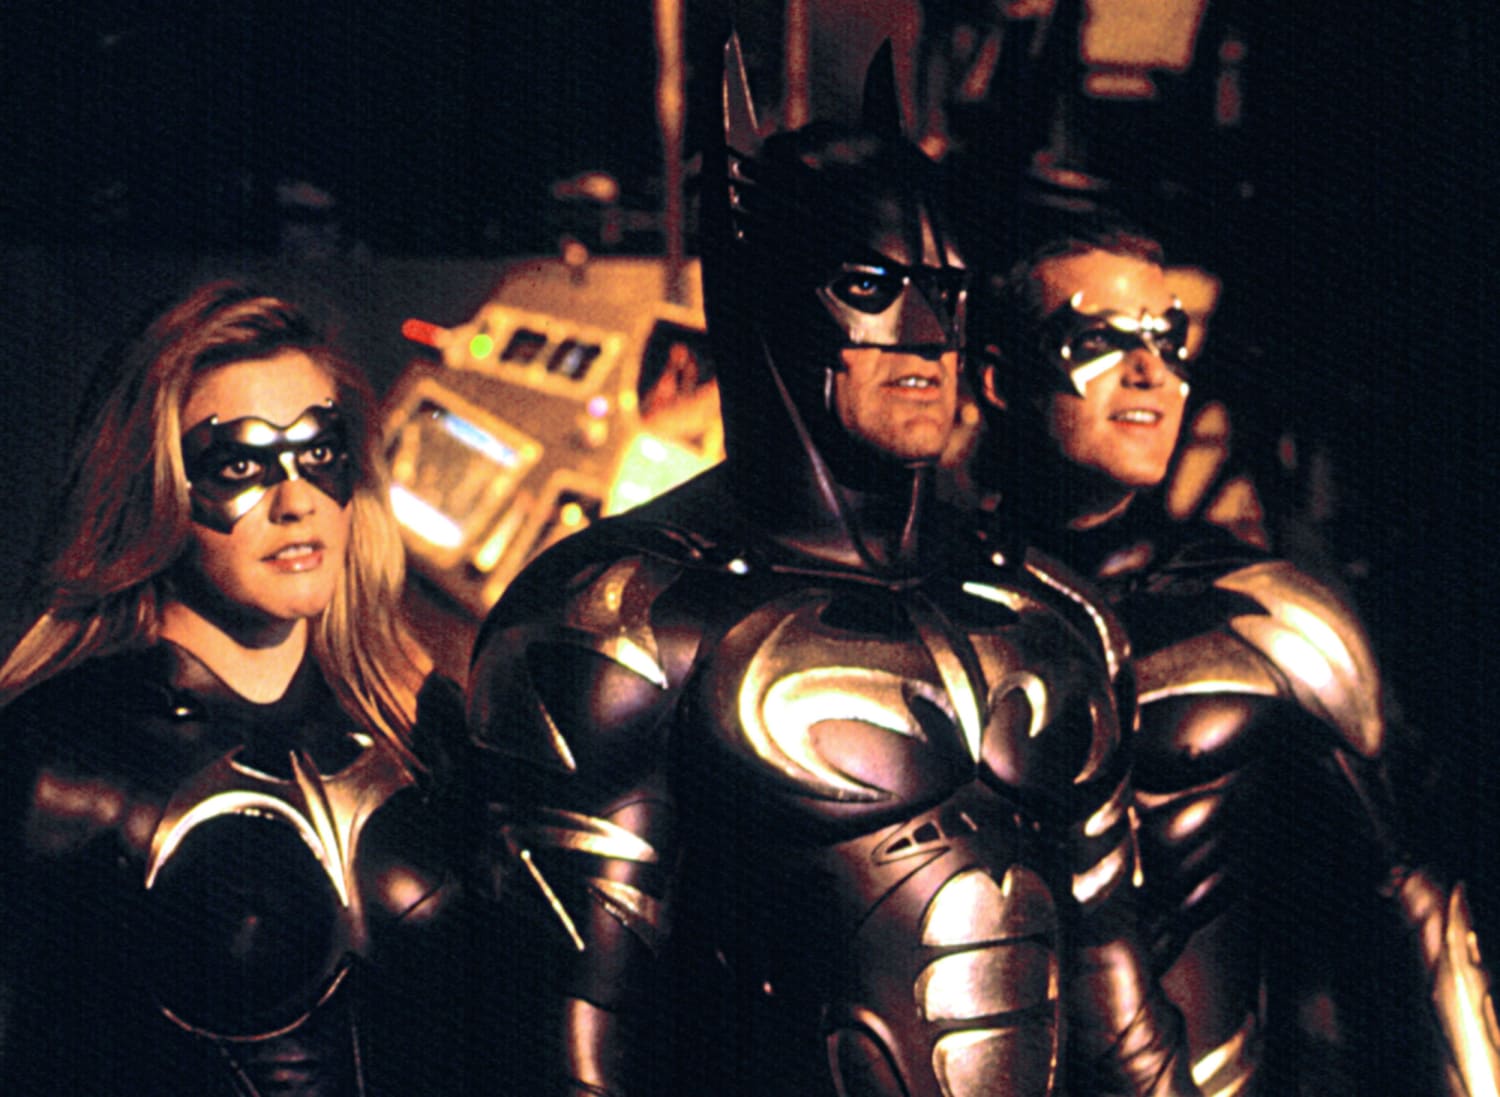 Alicia Silverstone 'stopped loving acting' after filming 'Batman & Robin'